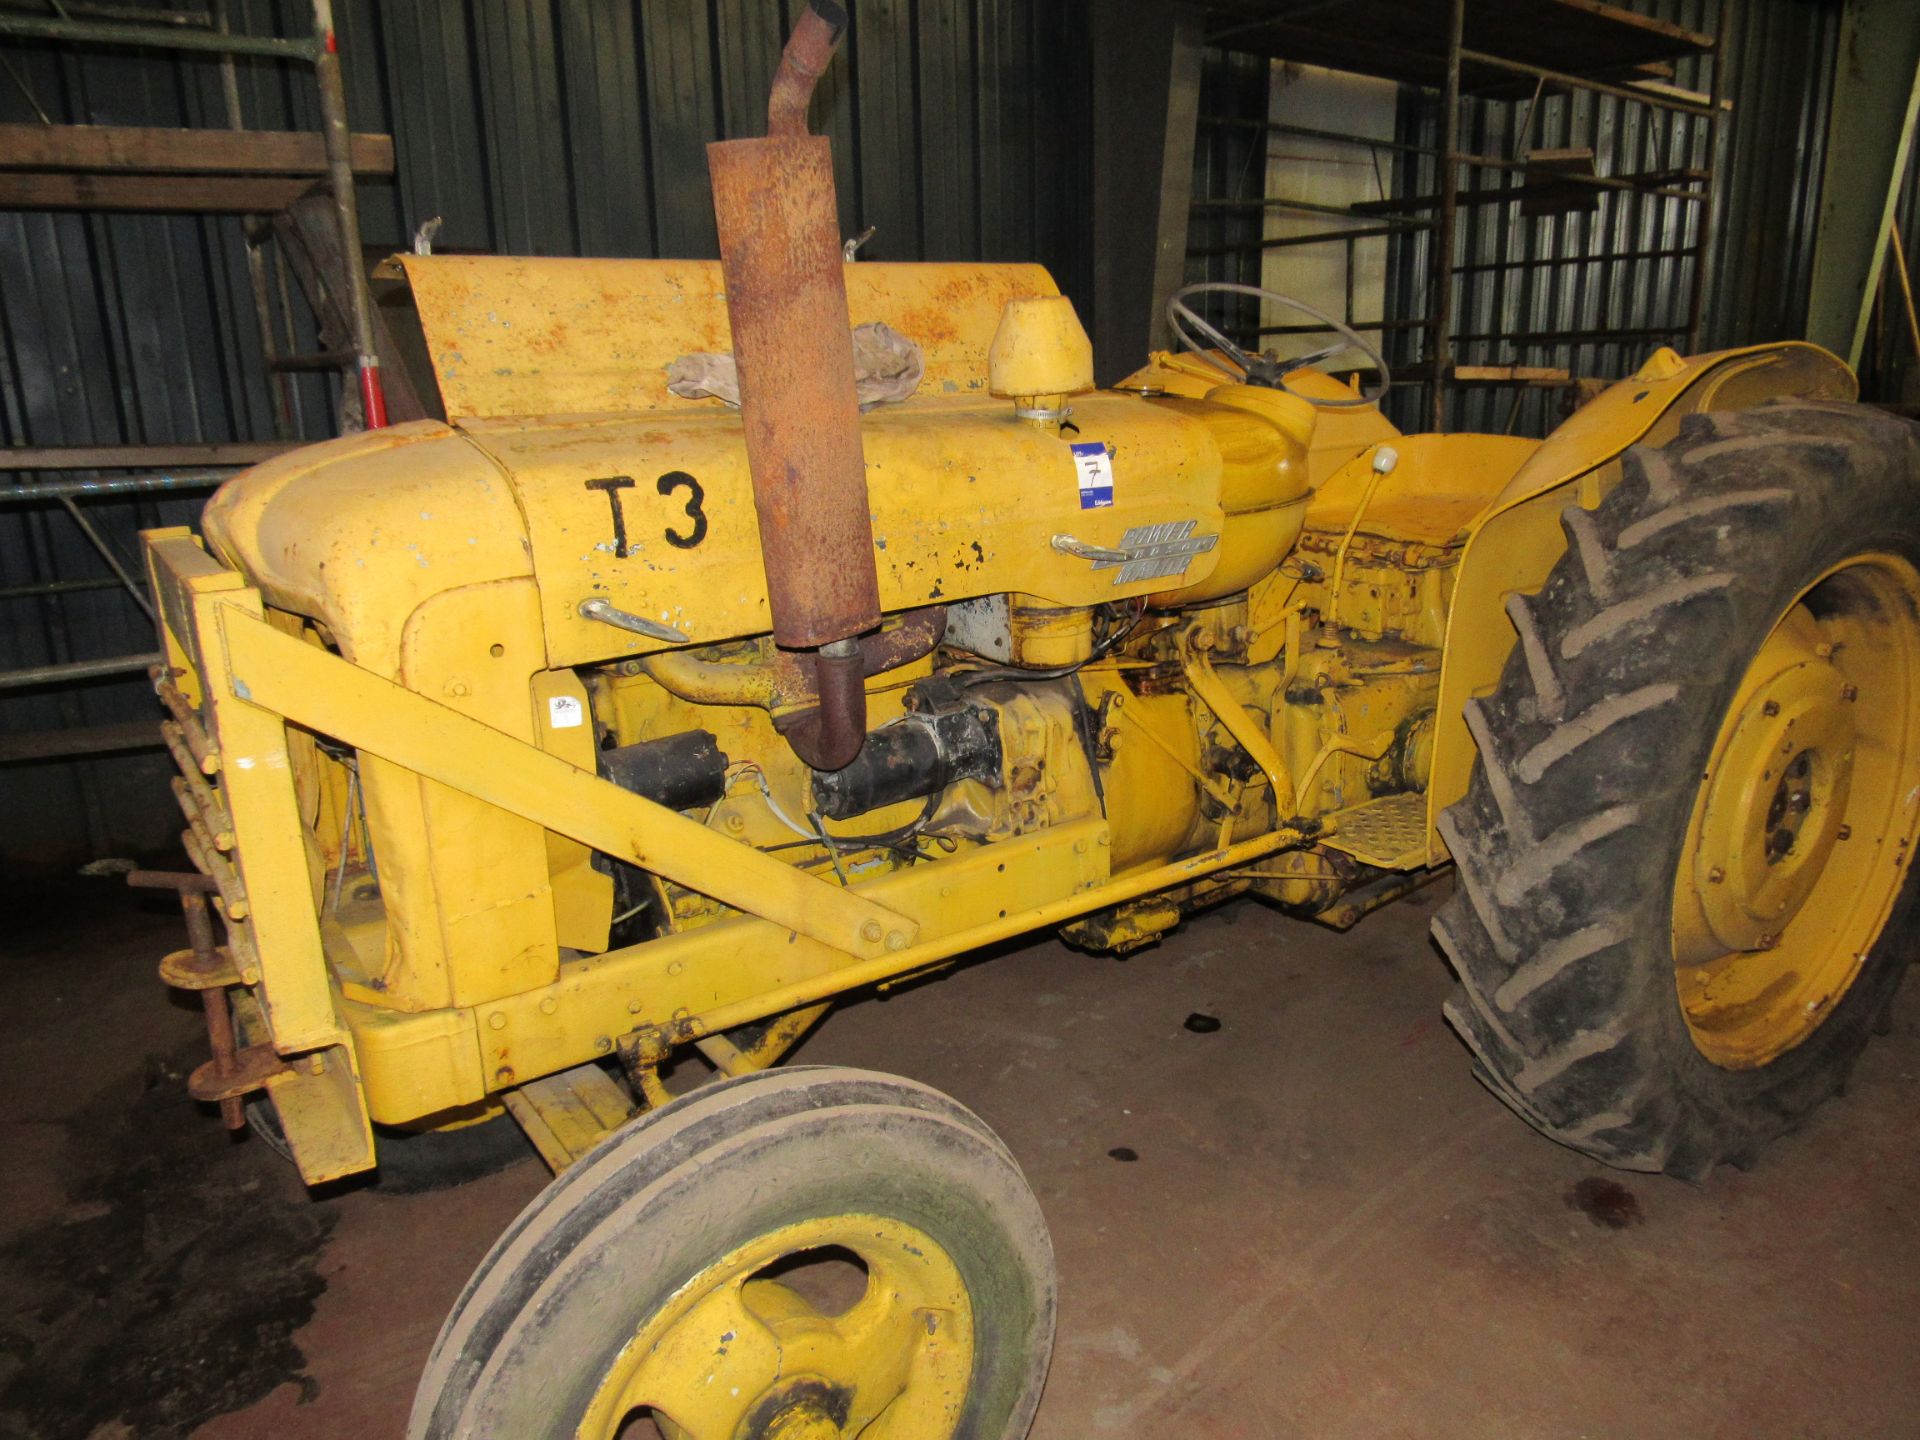 Fordson Power Major Industrial Vintage Tractor - Image 3 of 11